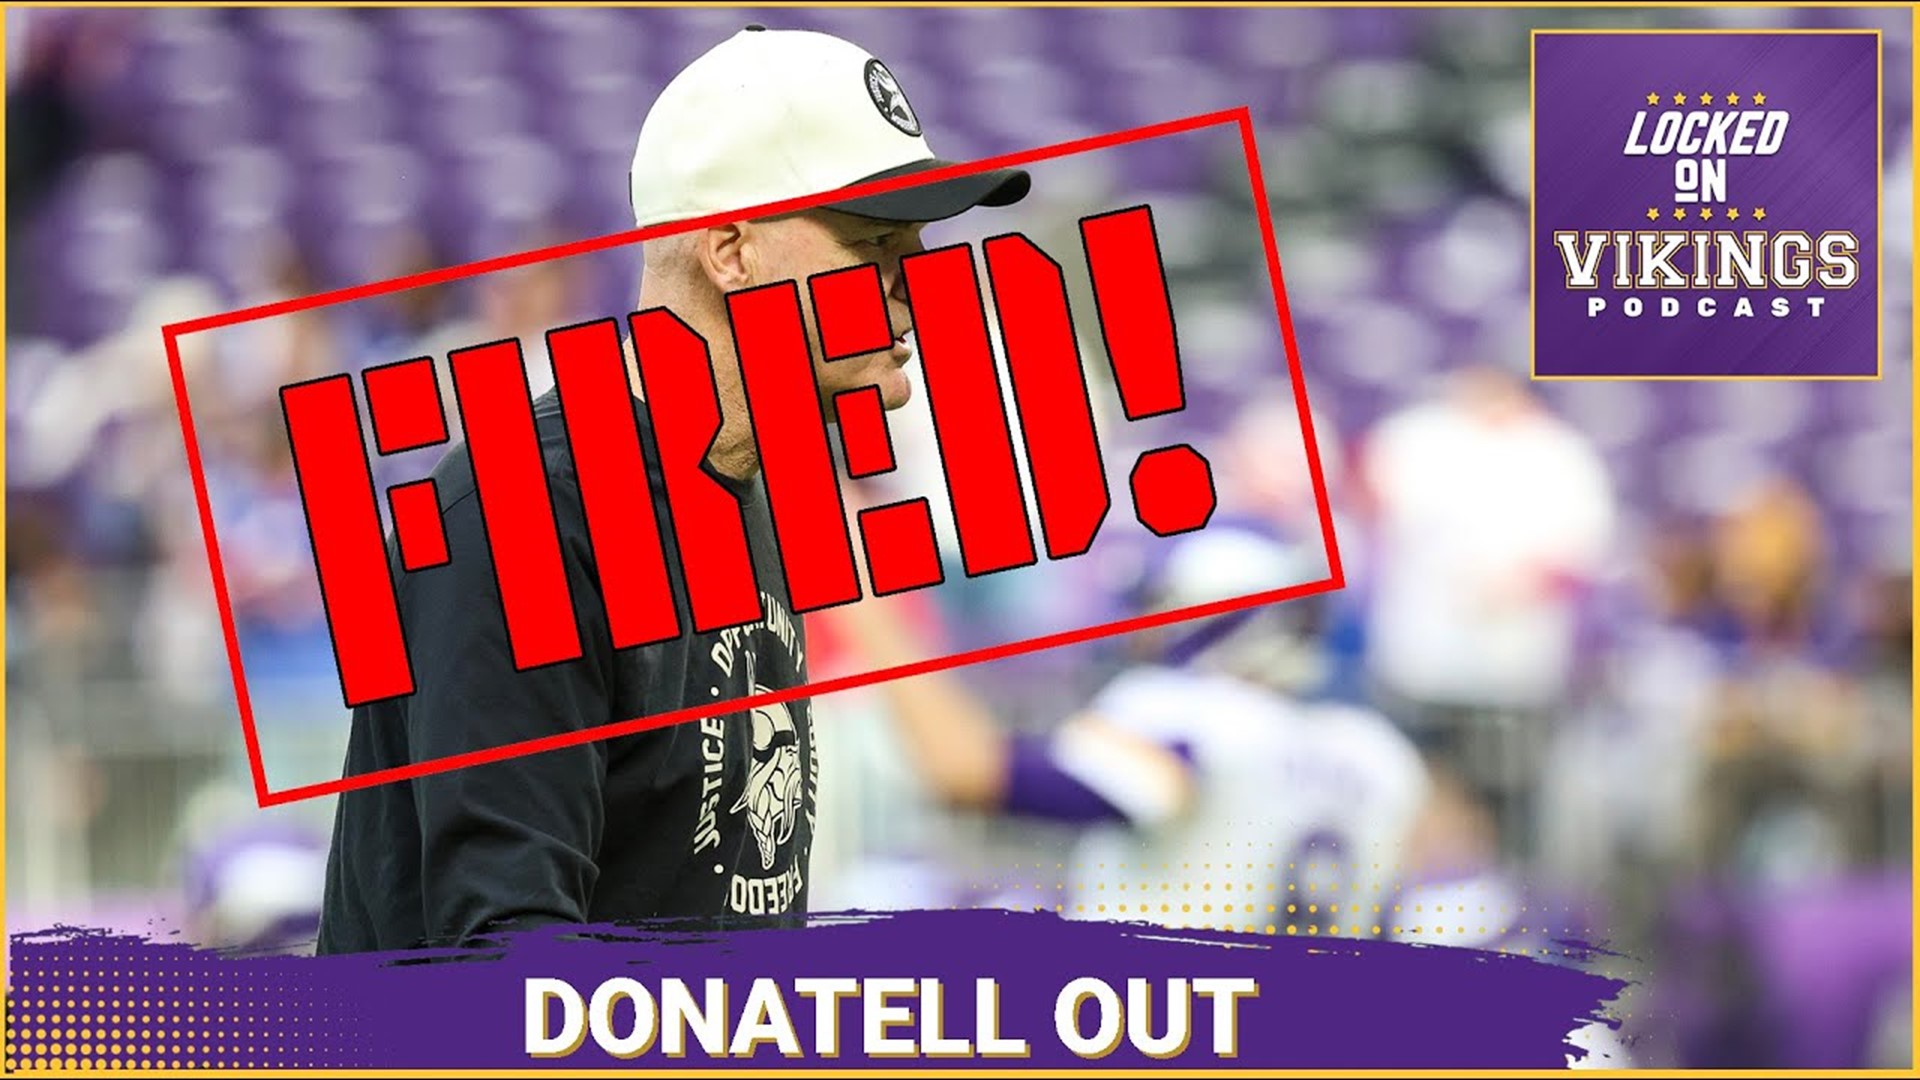 Less than a week after the Minnesota Vikings defense fell apart in the wild card round, the Vikings parted ways with defensive coordinator Ed Donatell.